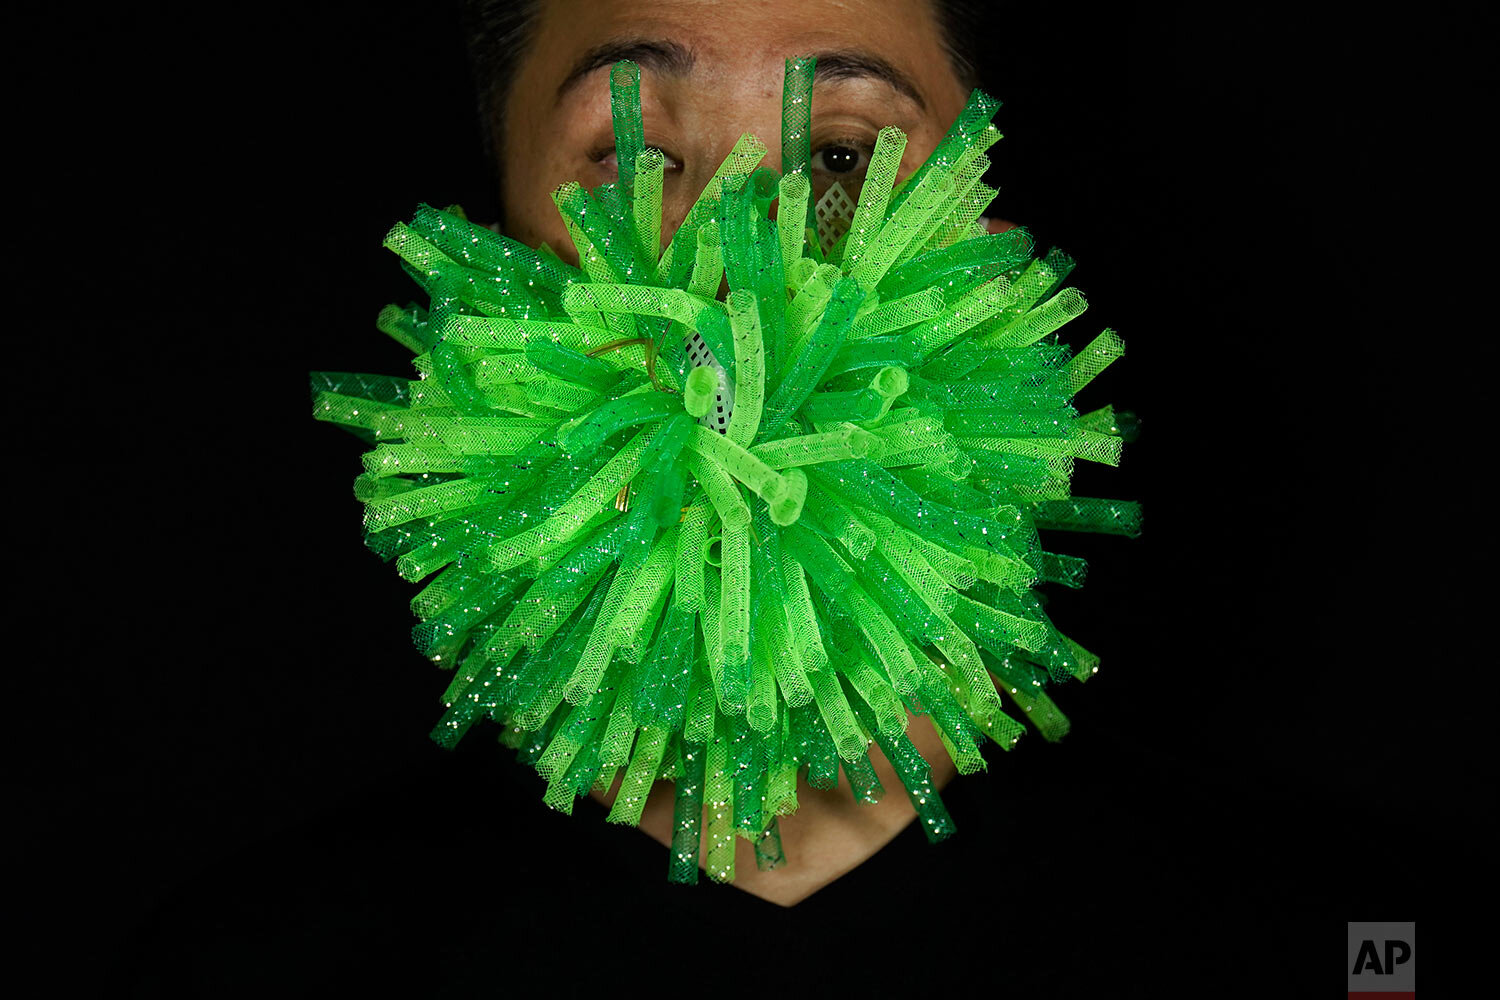  Edmond Kok, a Hong Kong theater costume designer and actor, wearing a spiky green mask which is a 3D visualisation of corona virus in Hong Kong Thursday, Aug. 6, 2020. (AP Photo/Vincent Yu) 